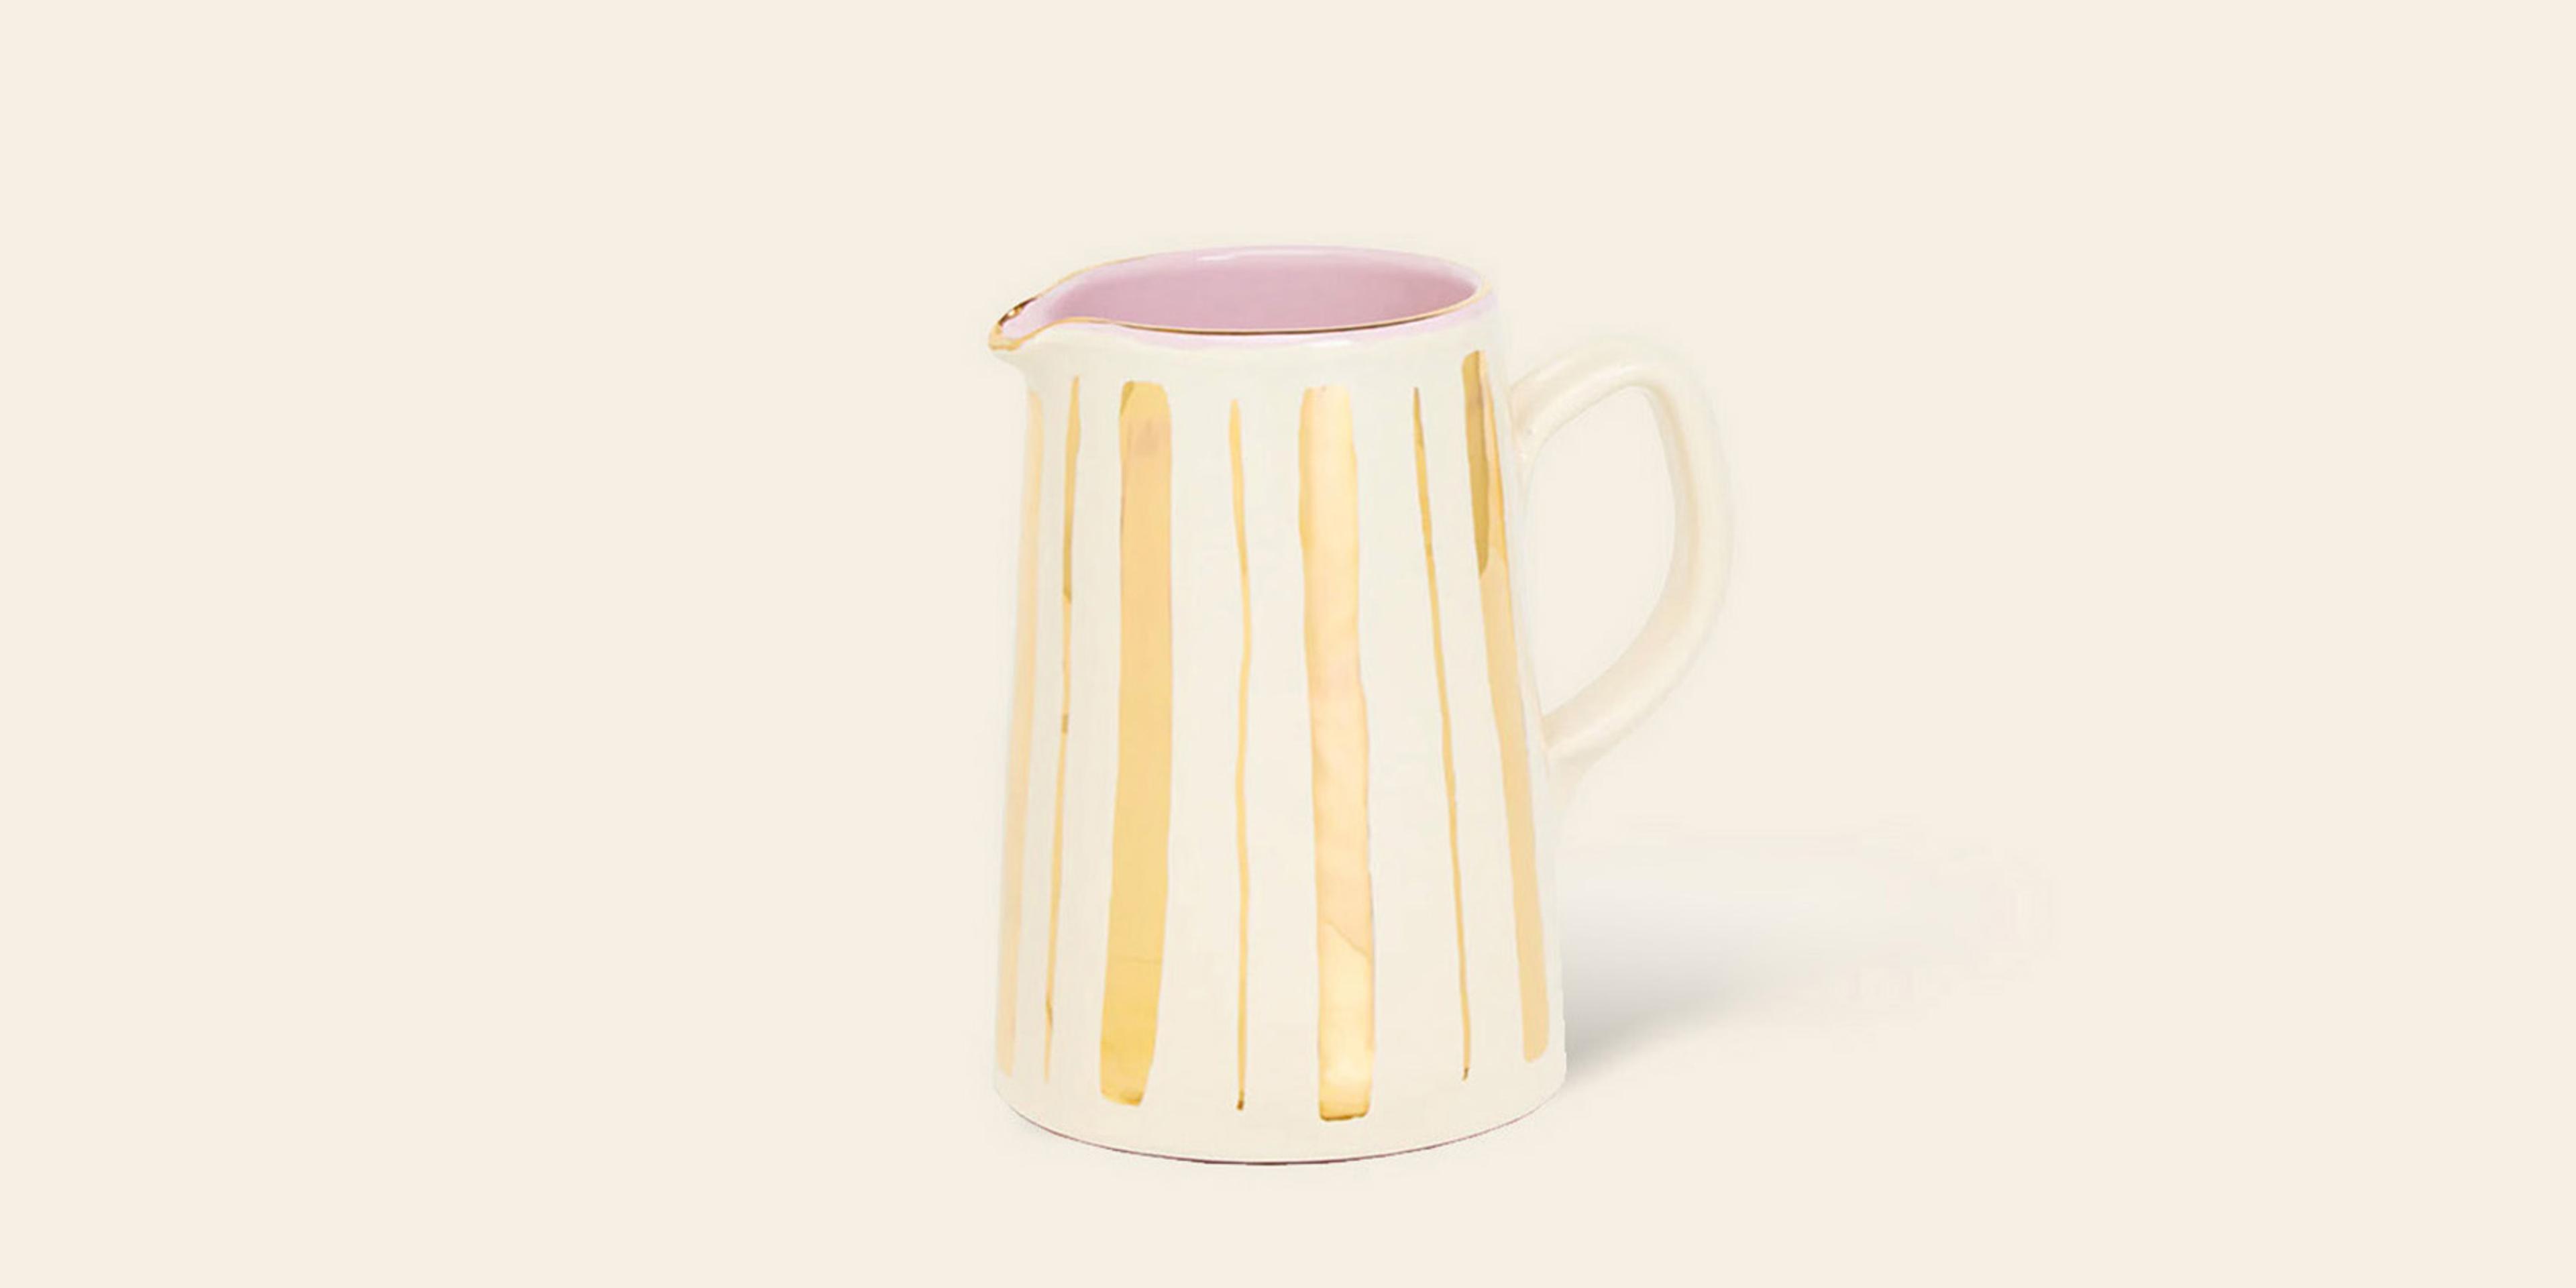 A gold and cream tall jug with handle and pink interior glaze